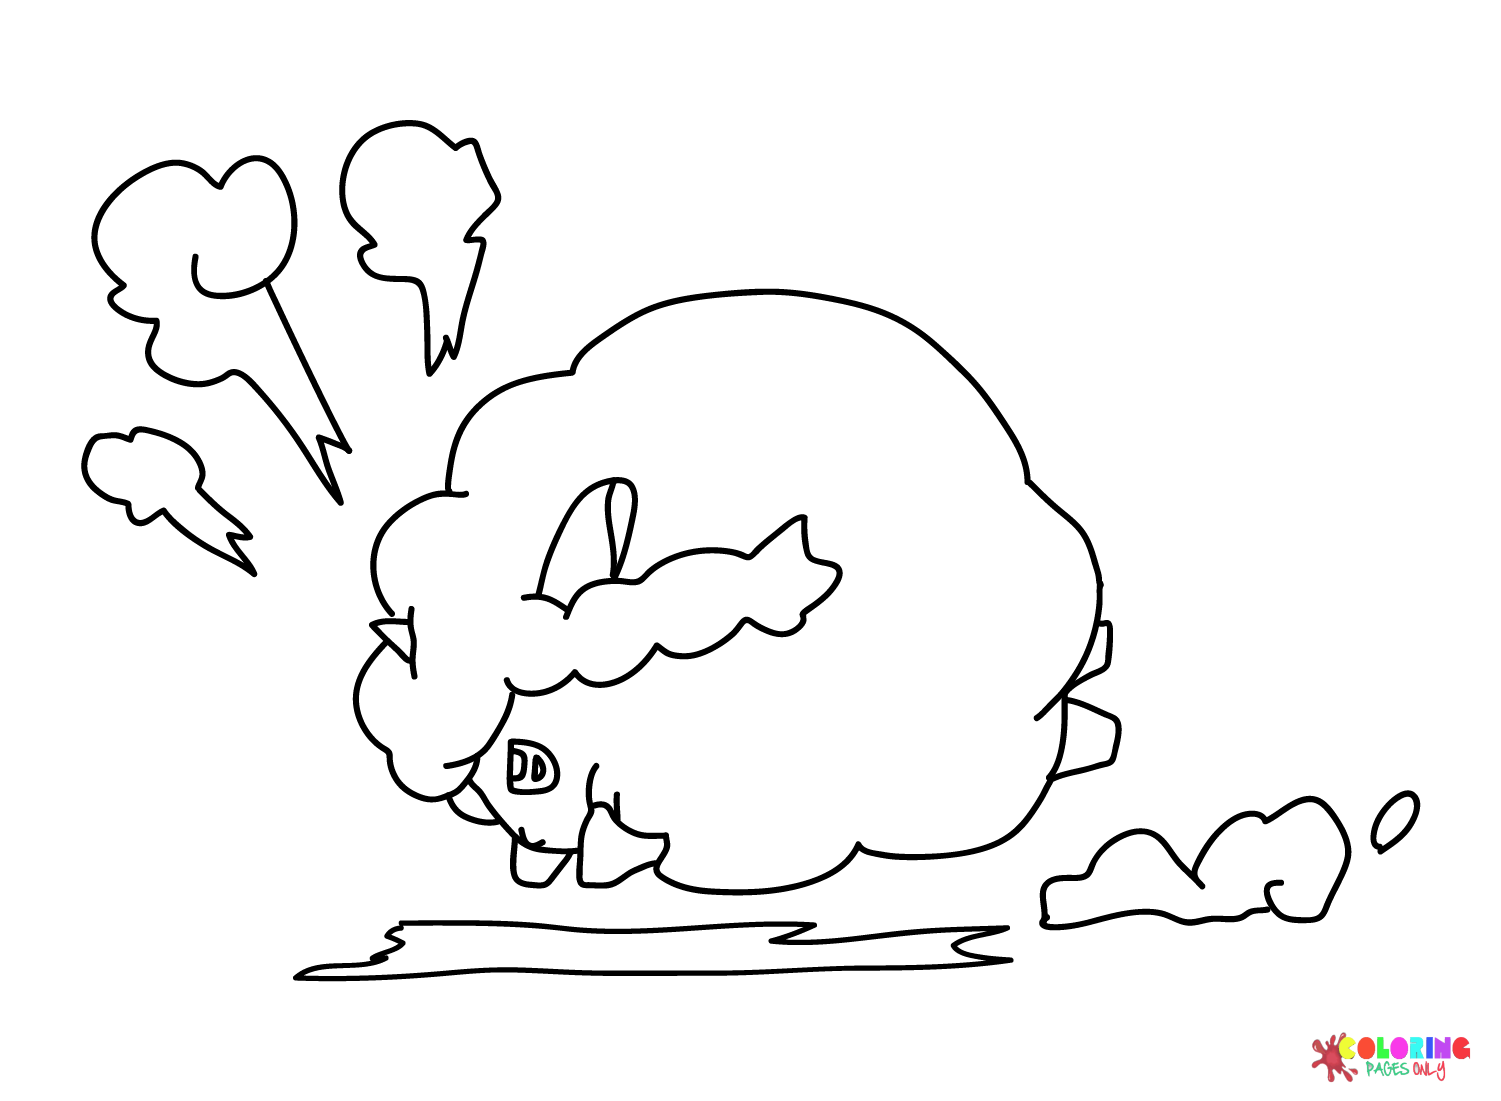 Wooloo Angry from Wooloo